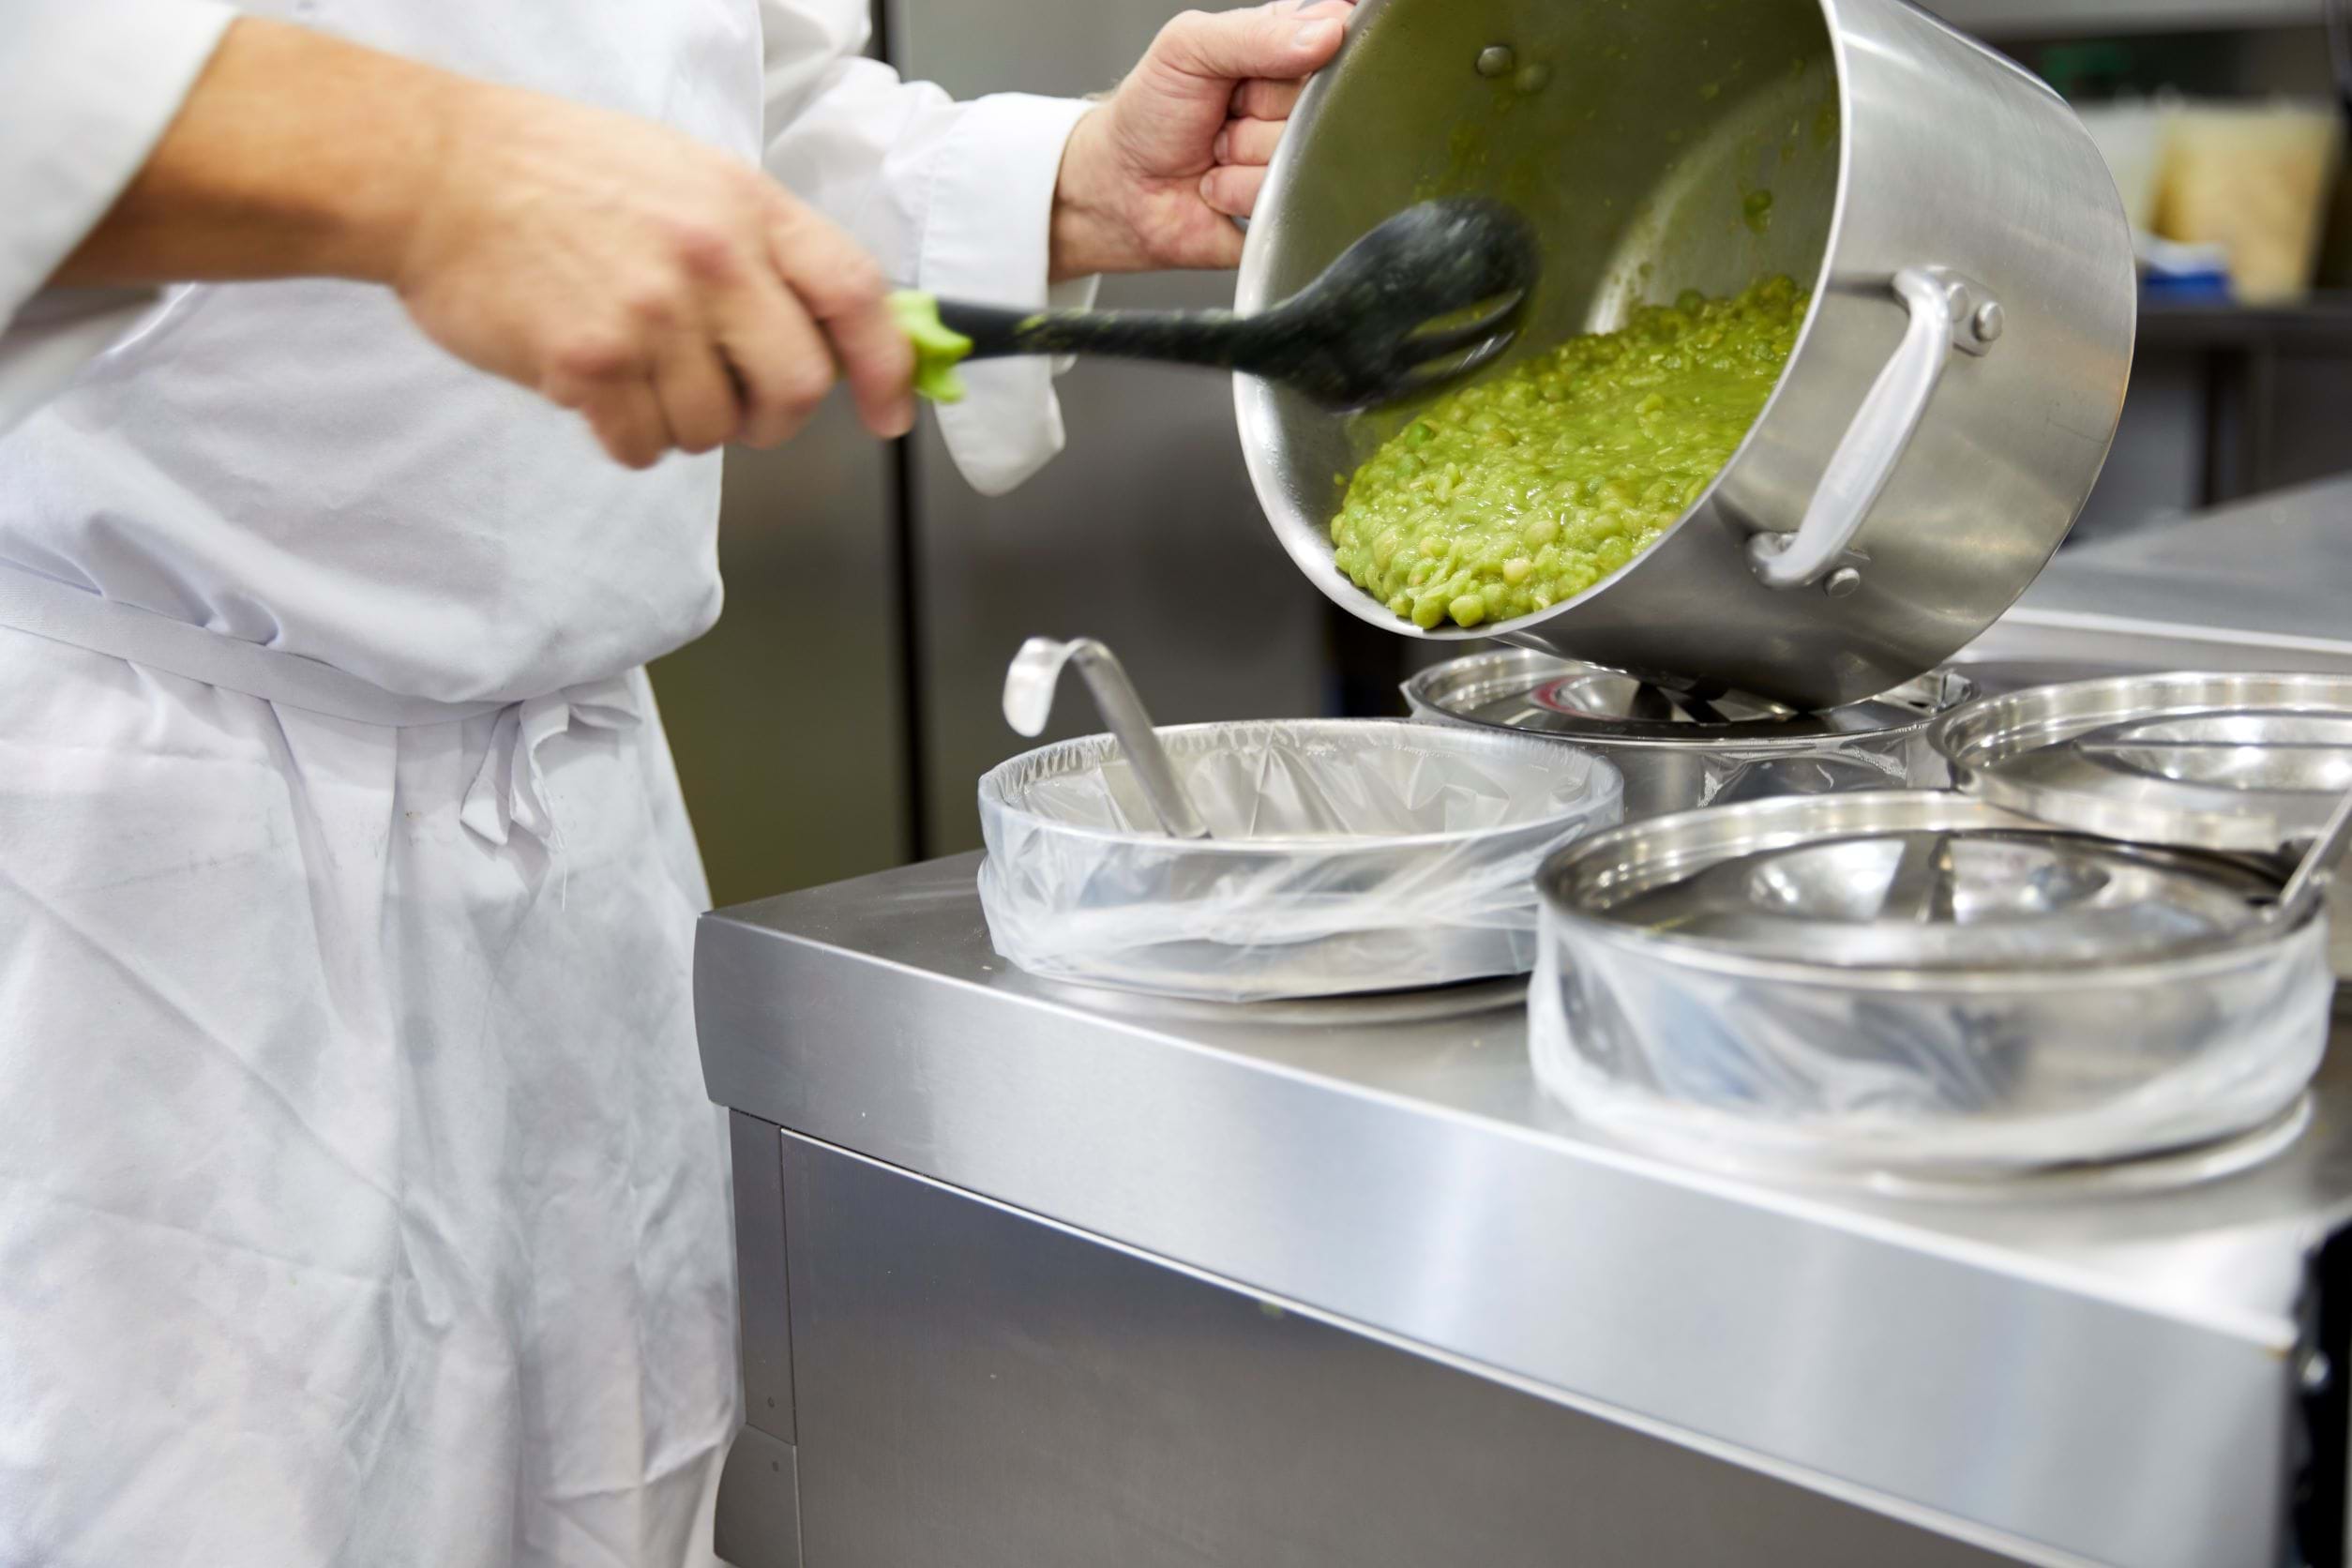 Photo shows someone pouring mushy peas from a pot in to a bain marie for serving.